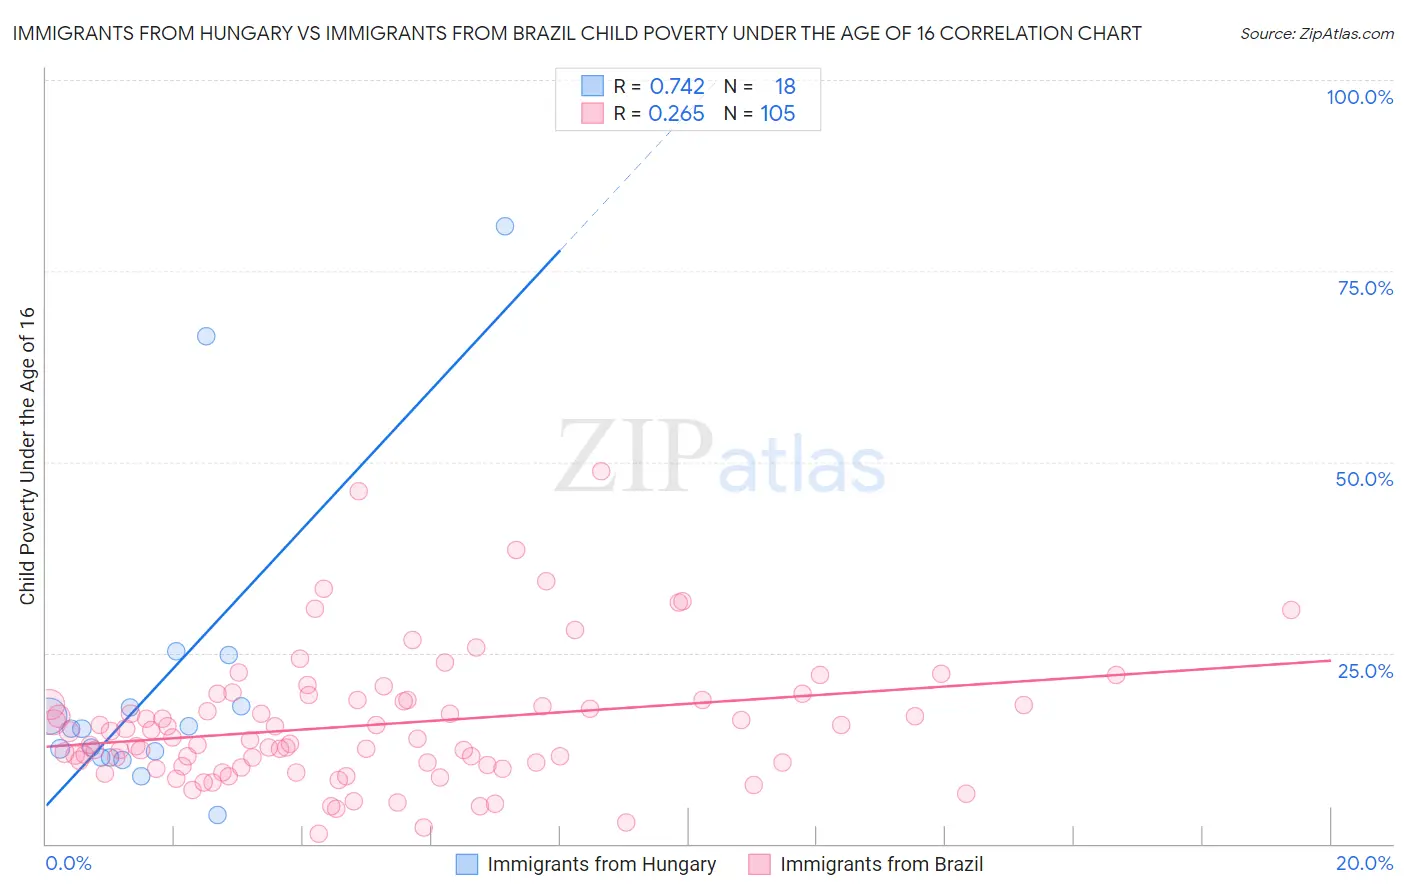 Immigrants from Hungary vs Immigrants from Brazil Child Poverty Under the Age of 16